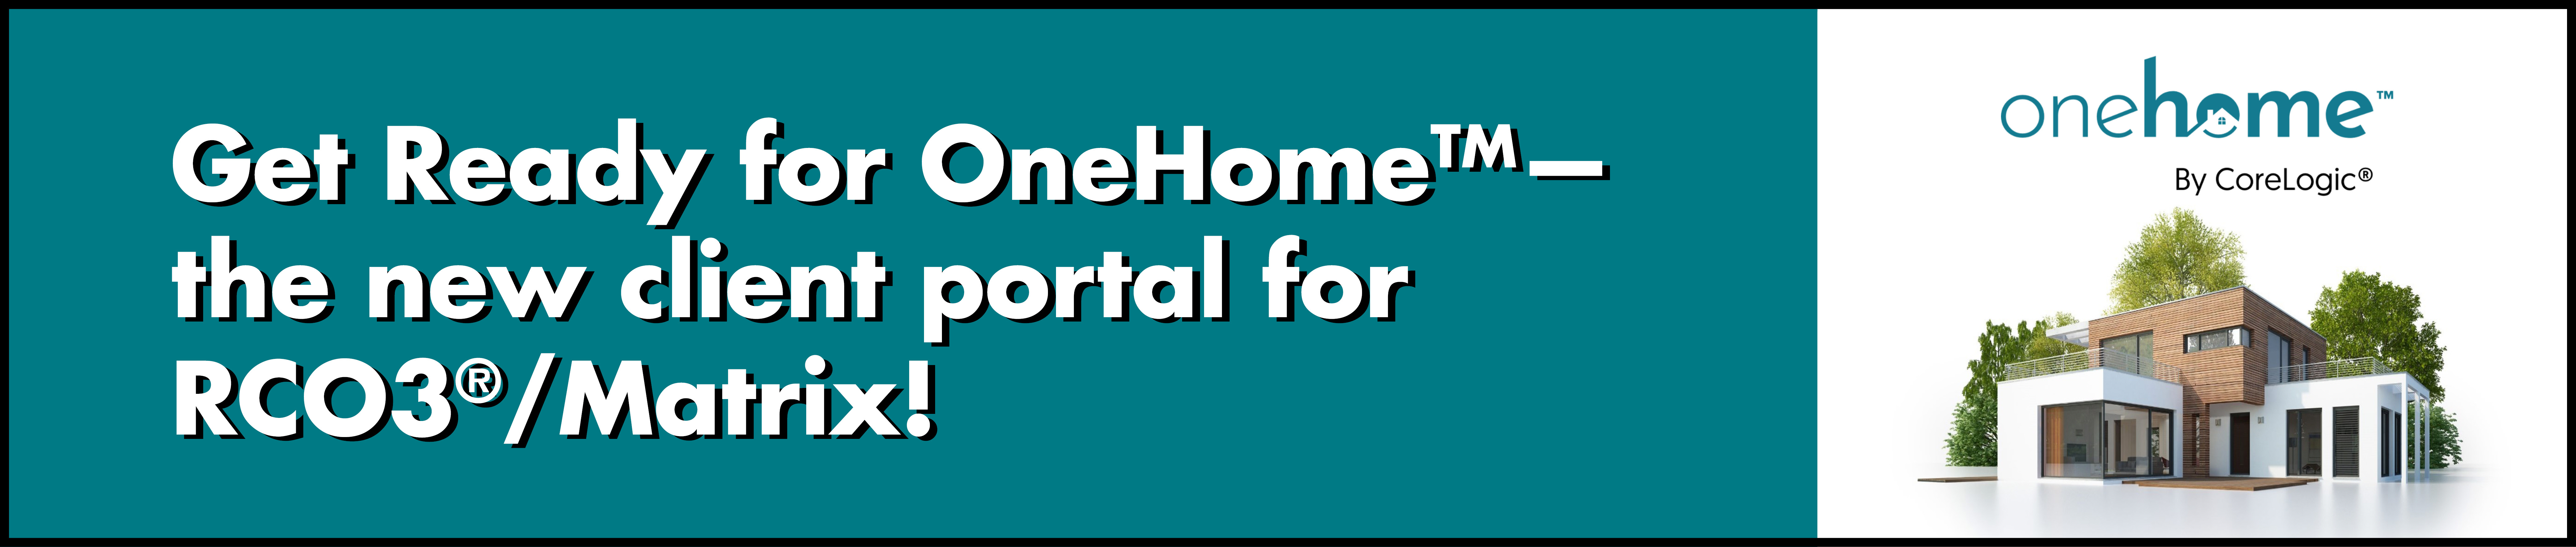 Get Ready for OneHome